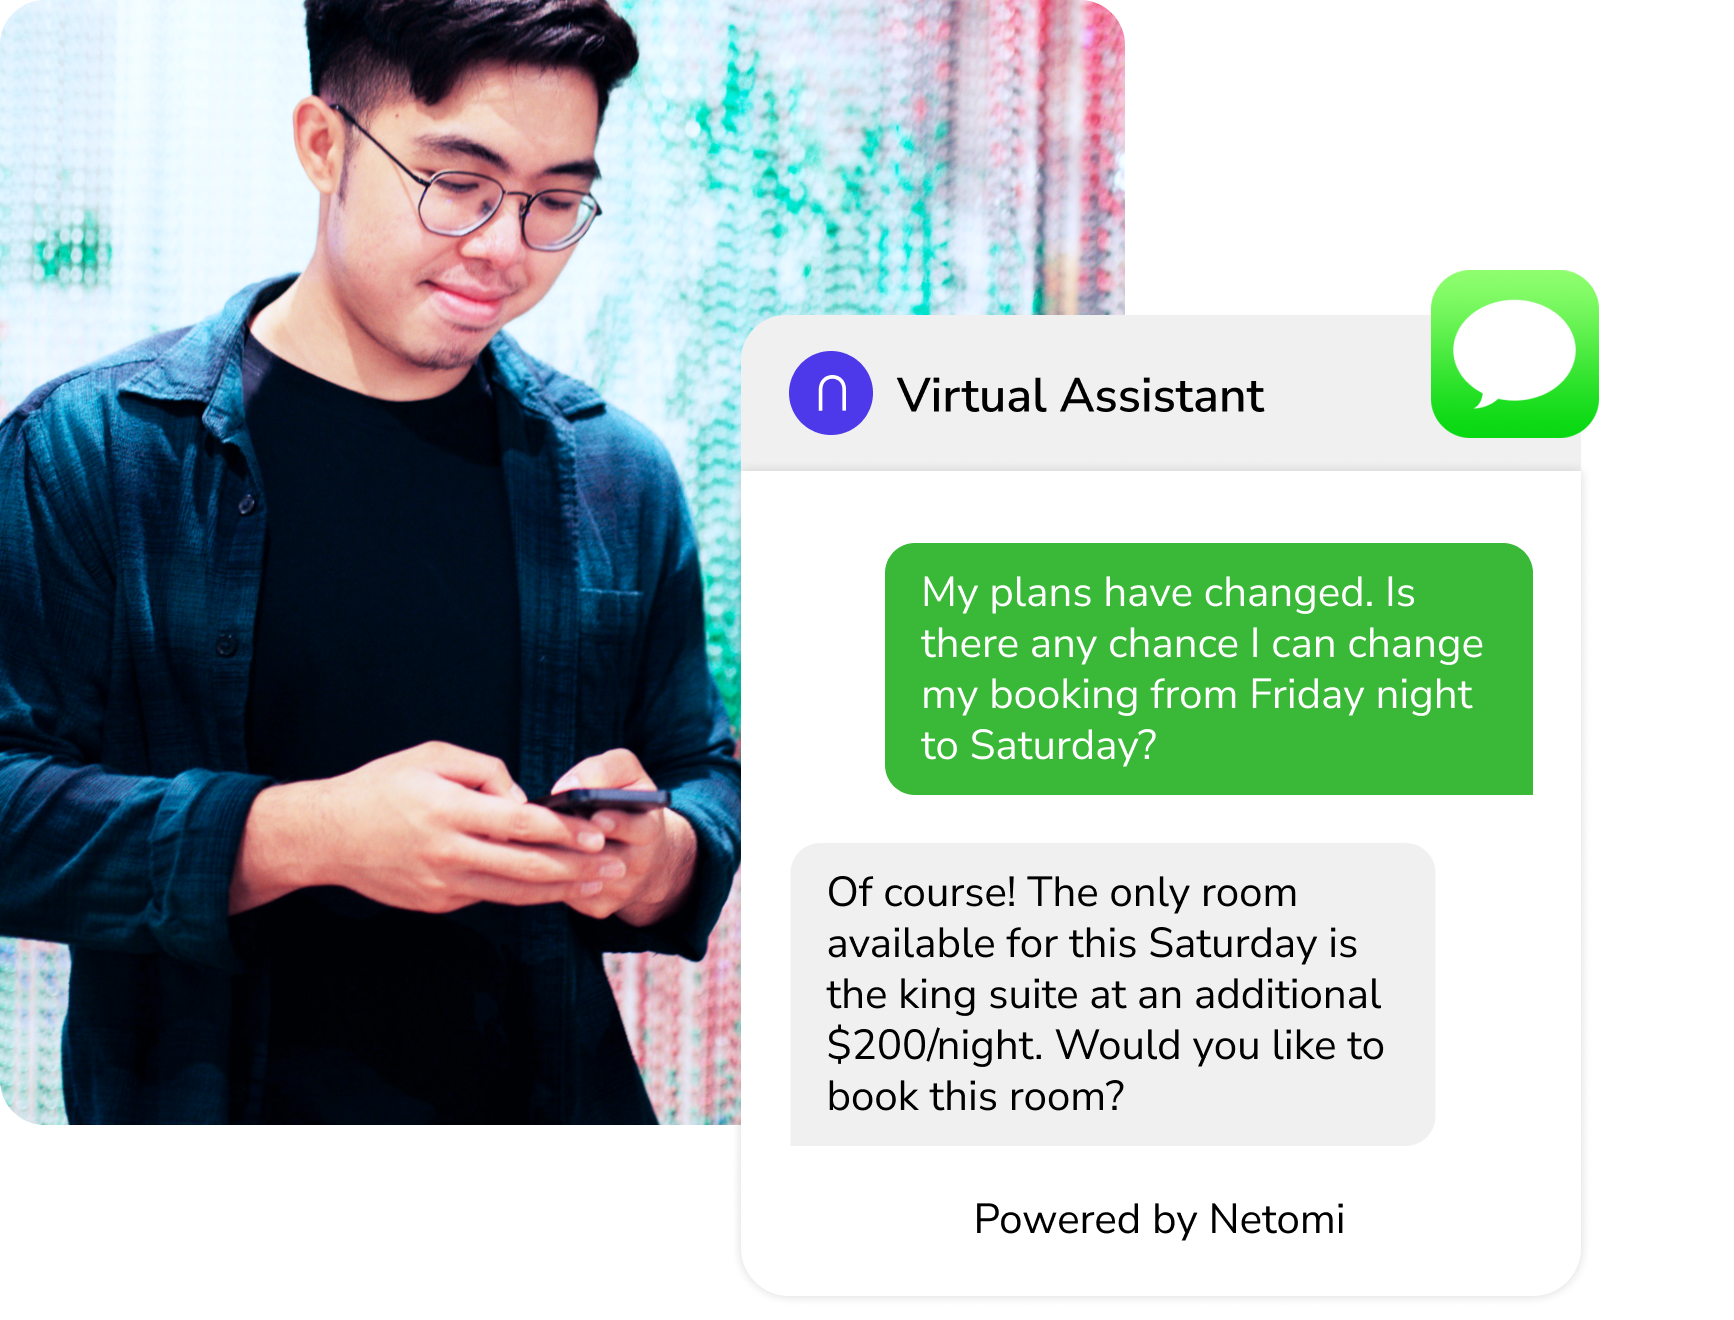 AI Customer Service integrated with SMS and text messages